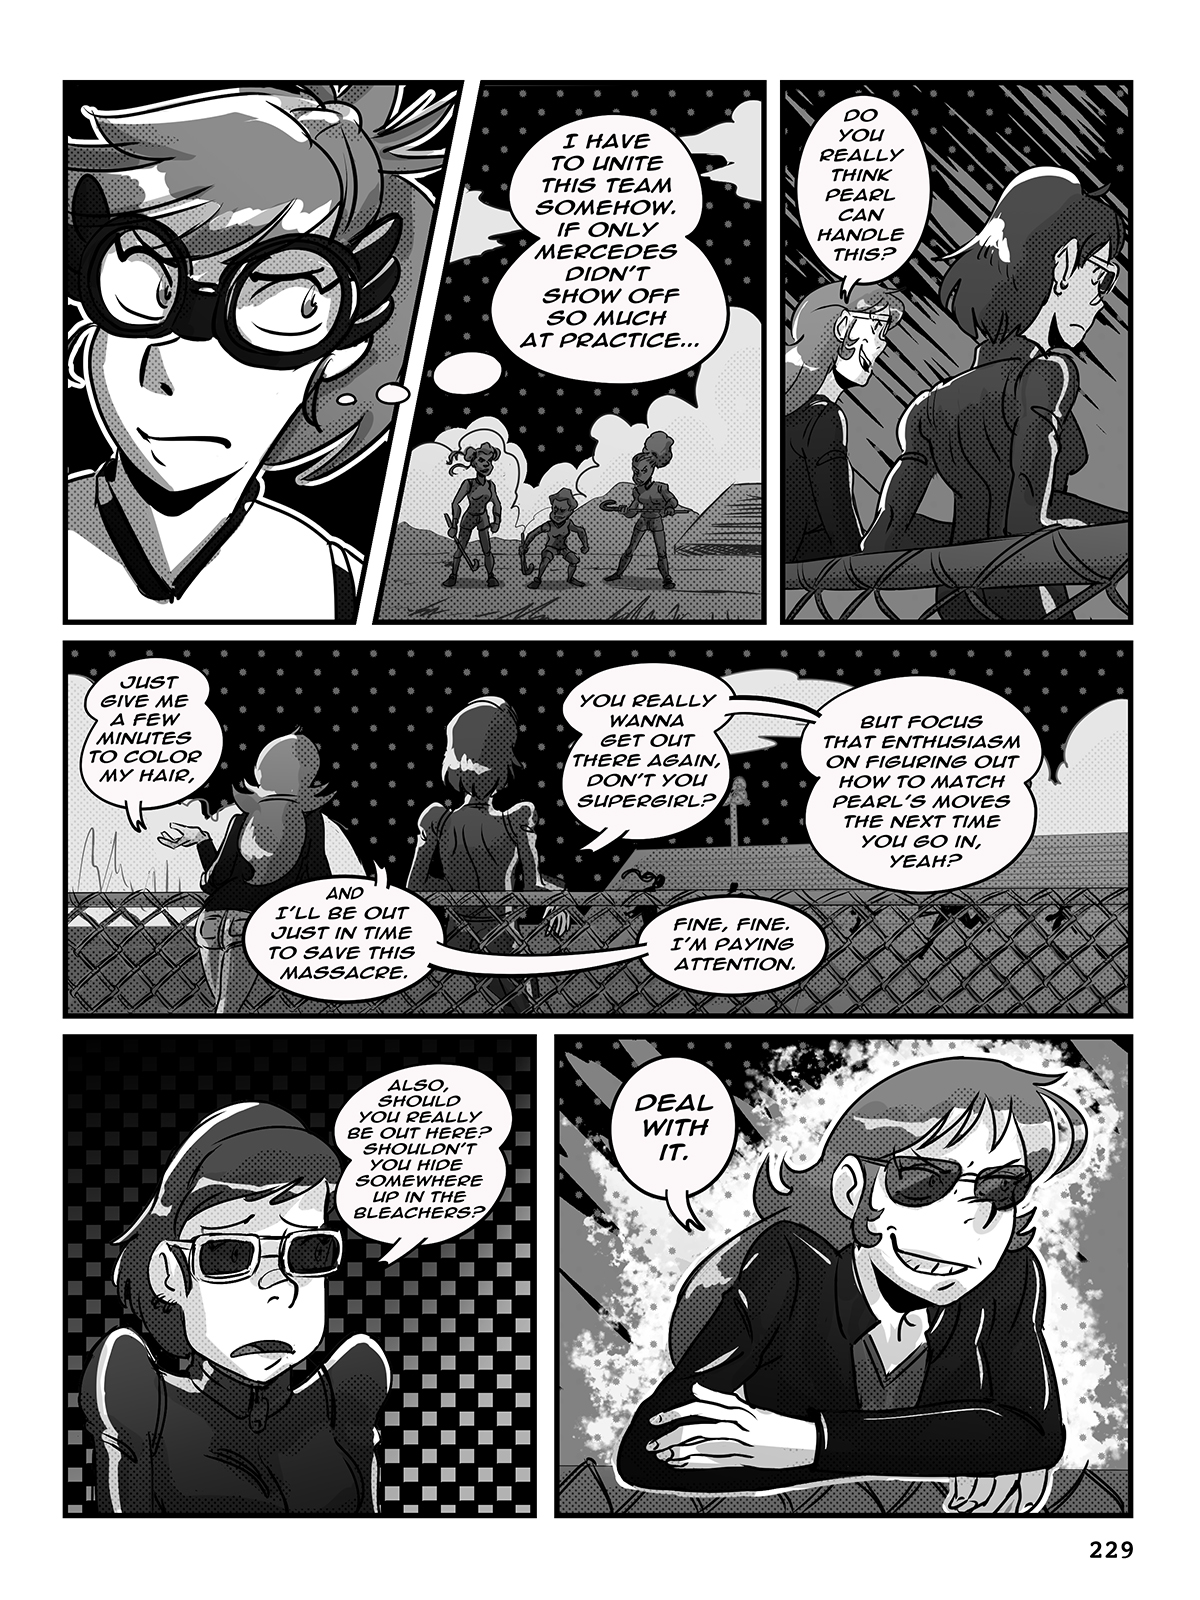 Hockey, Love, & GUTS! – Chapter 9 – Page 229